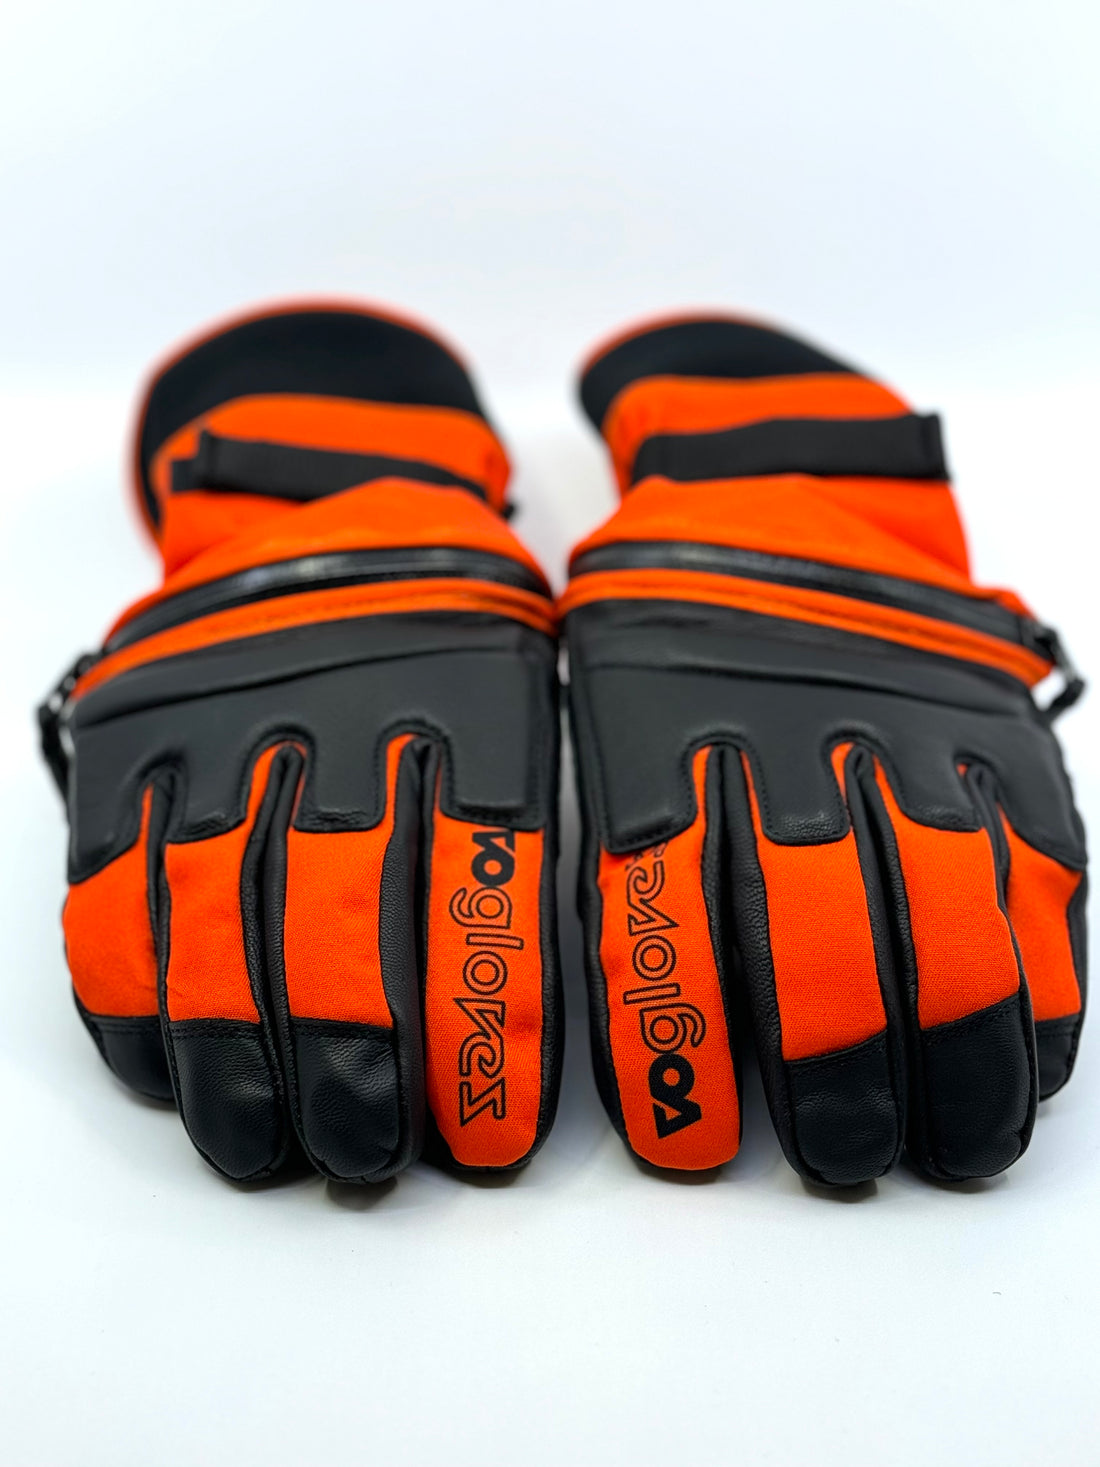 NEW! Orange and Black Extra Thin Palm Knuckle Pad Gloves